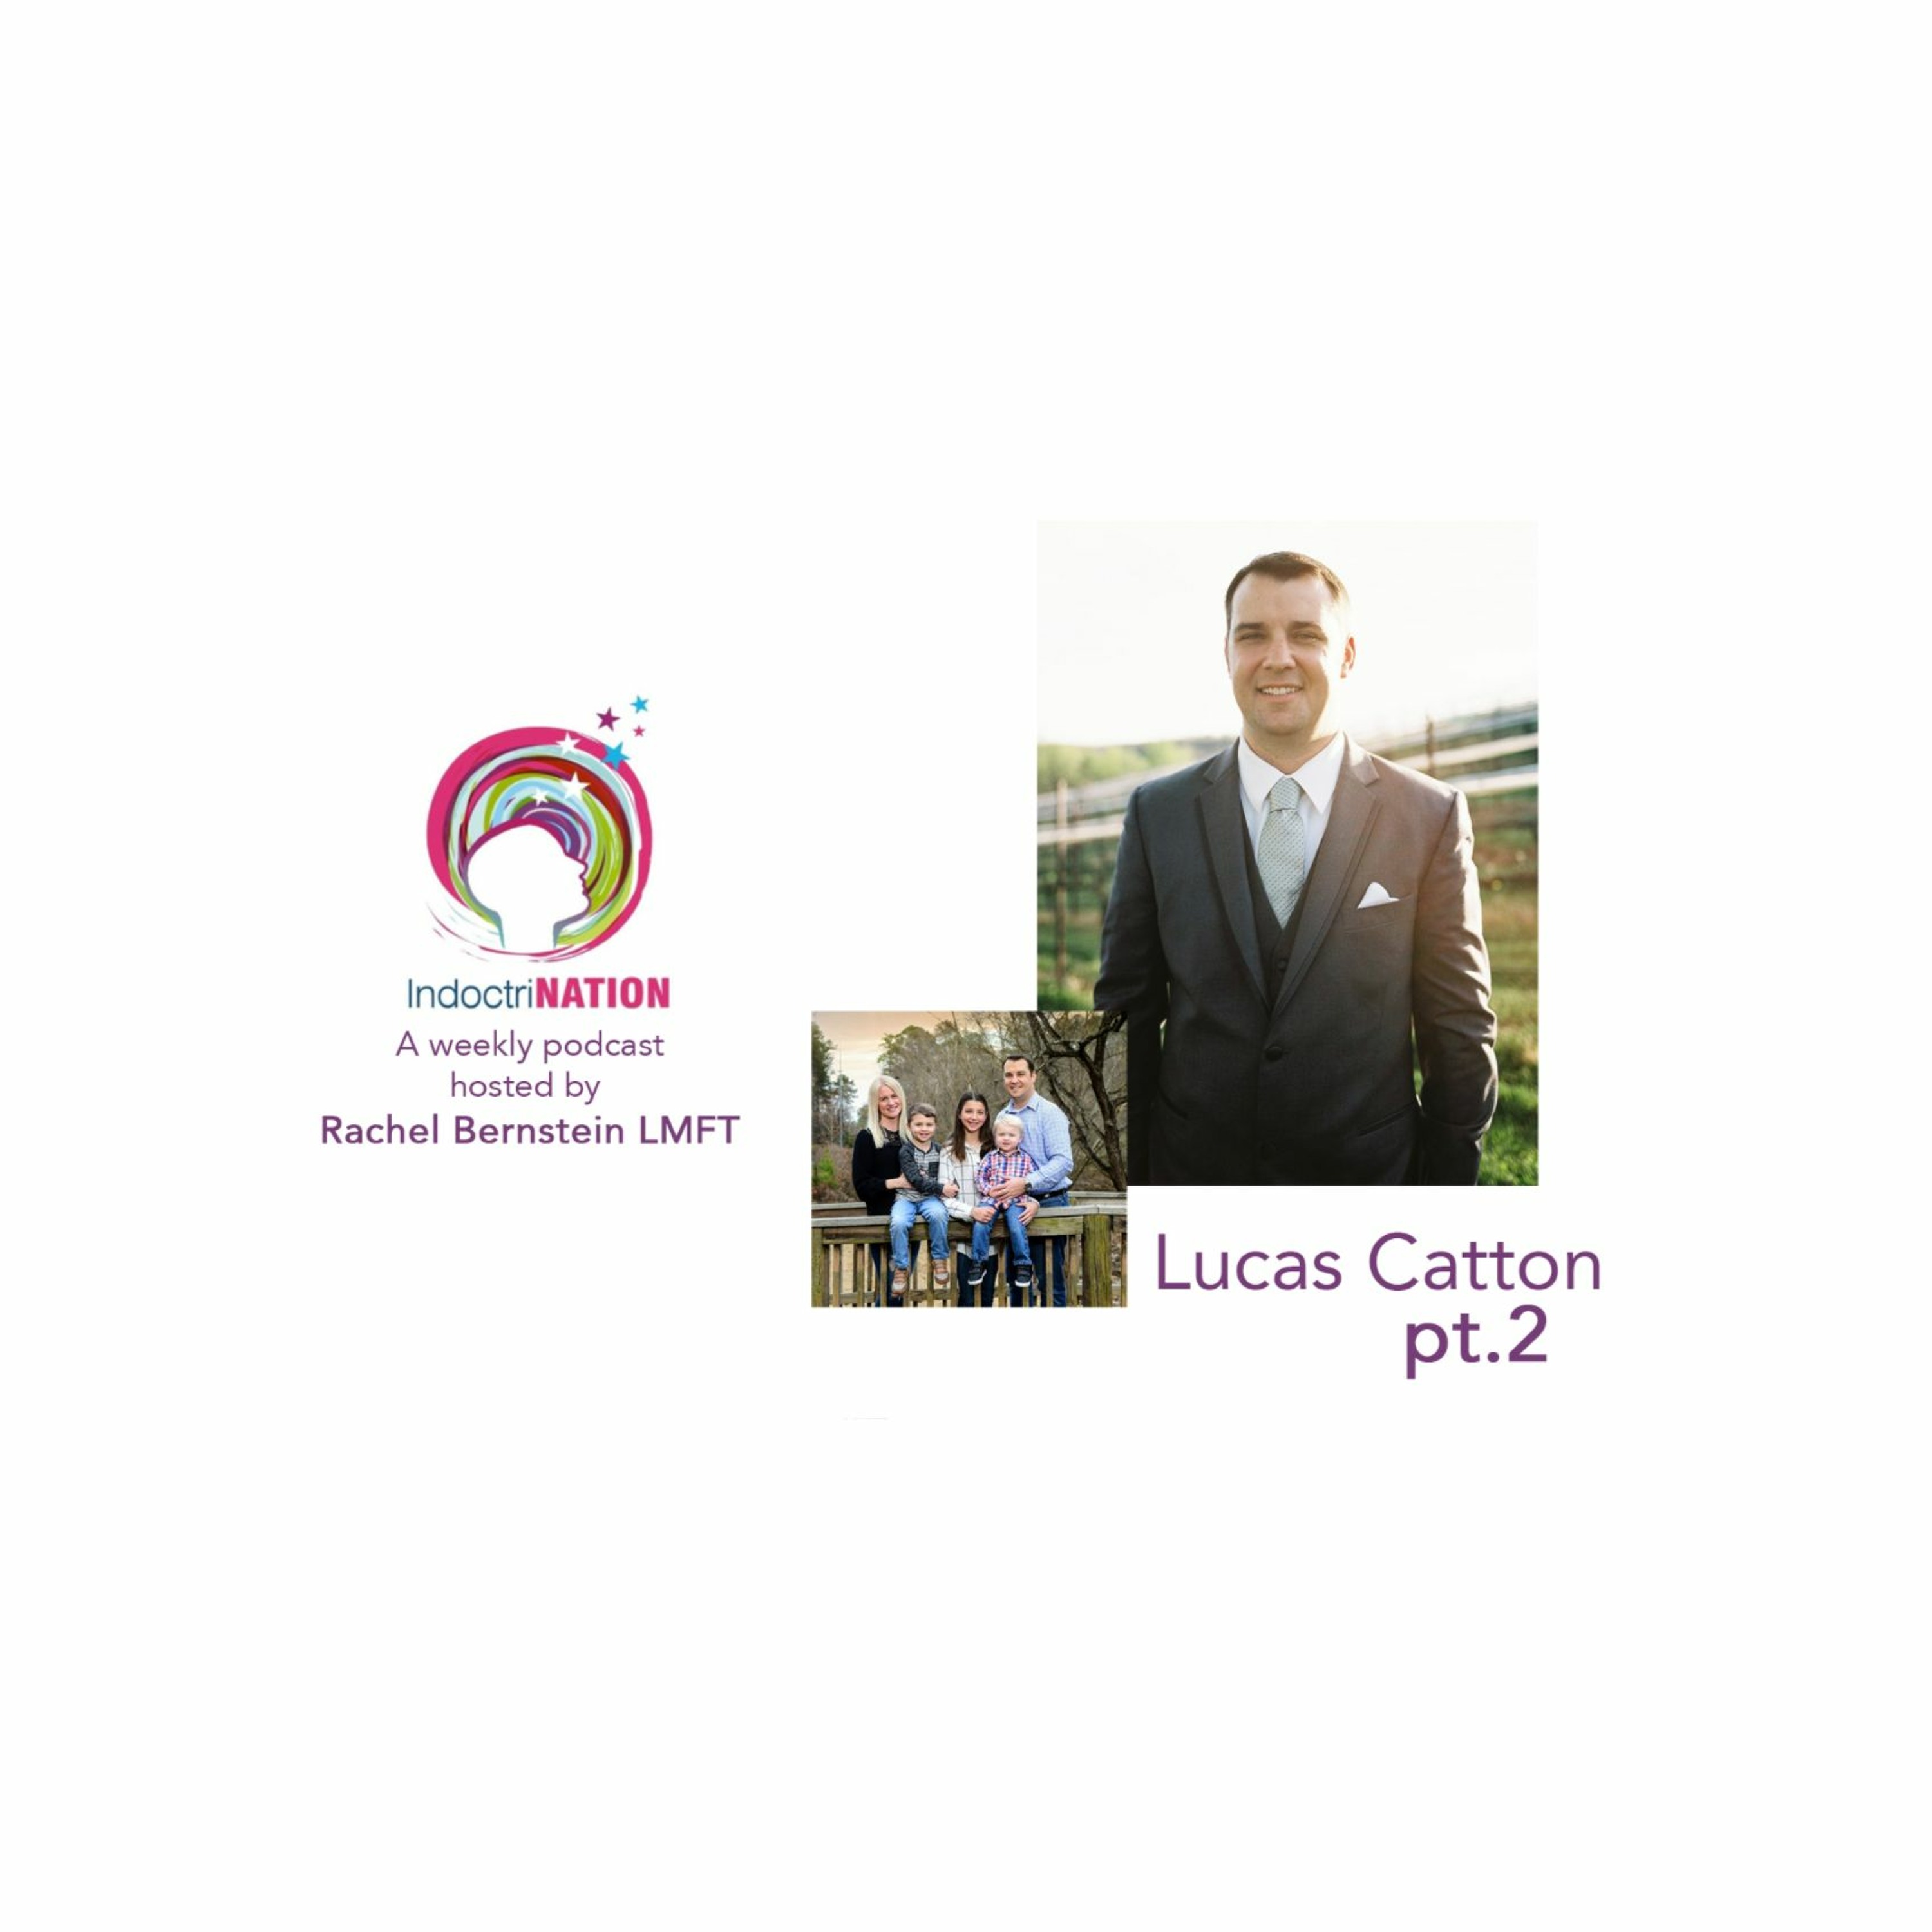 A Passion for Saving People w/ Lucas Catton, ex-President of Narconon - S5E11pt2 Image